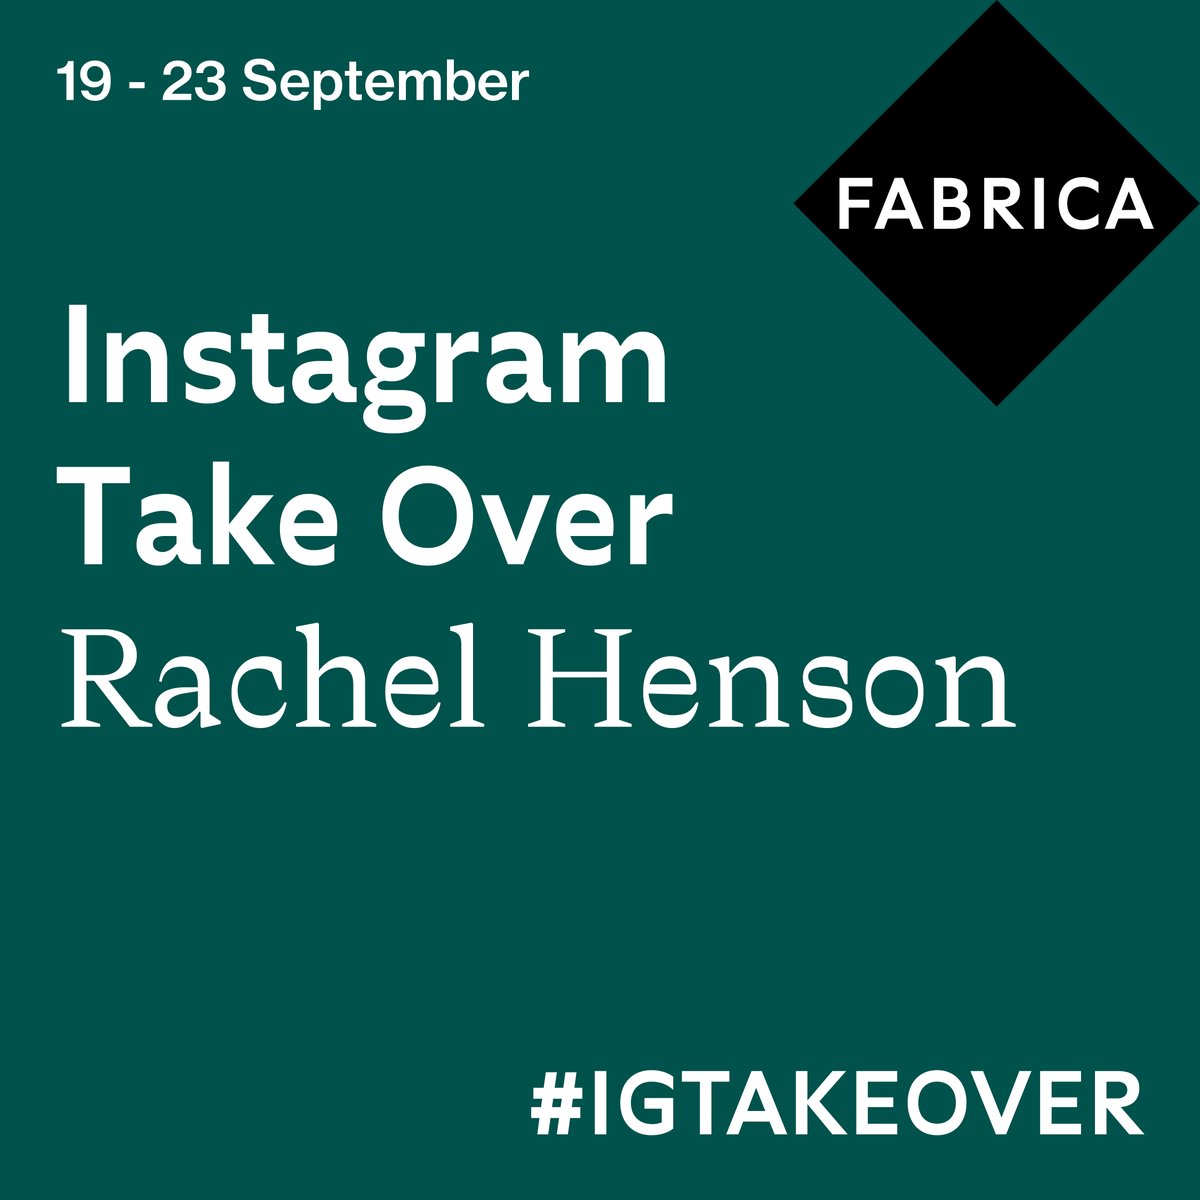 We are very excited to announce that @LivingCoastUK Residencies 2022 artist Rachel Henson (@outshifter) will be taking over the Fabrica Gallery Instagram feed this week 20 - 23 September. Head on over to discover more about the residency. instagram.com/fabricagallery